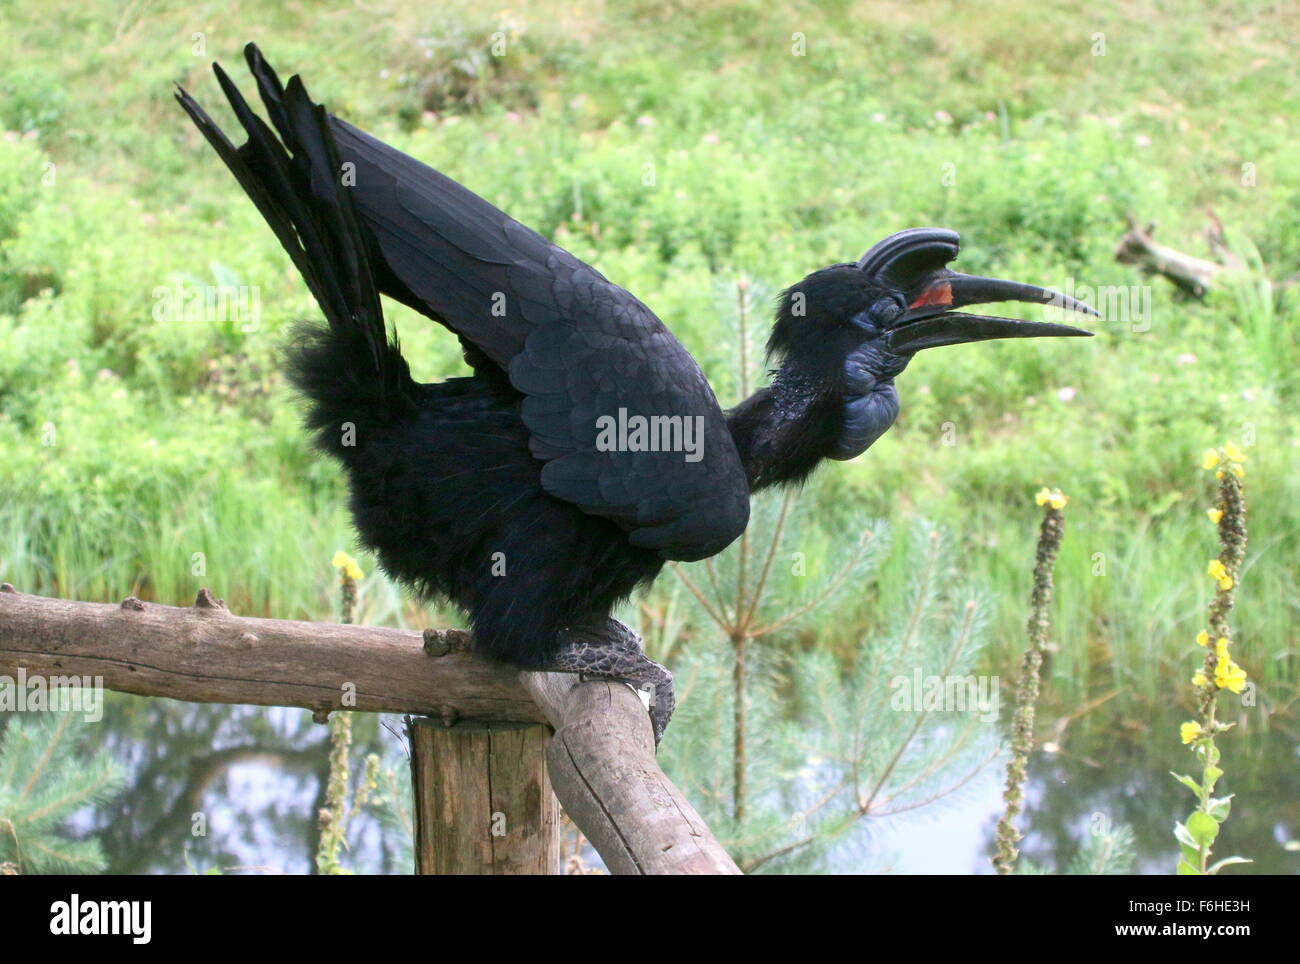 Female Abyssinian or Northern Ground hornbill (Bucorvus abyssinicus), ready for take-off Stock Photo